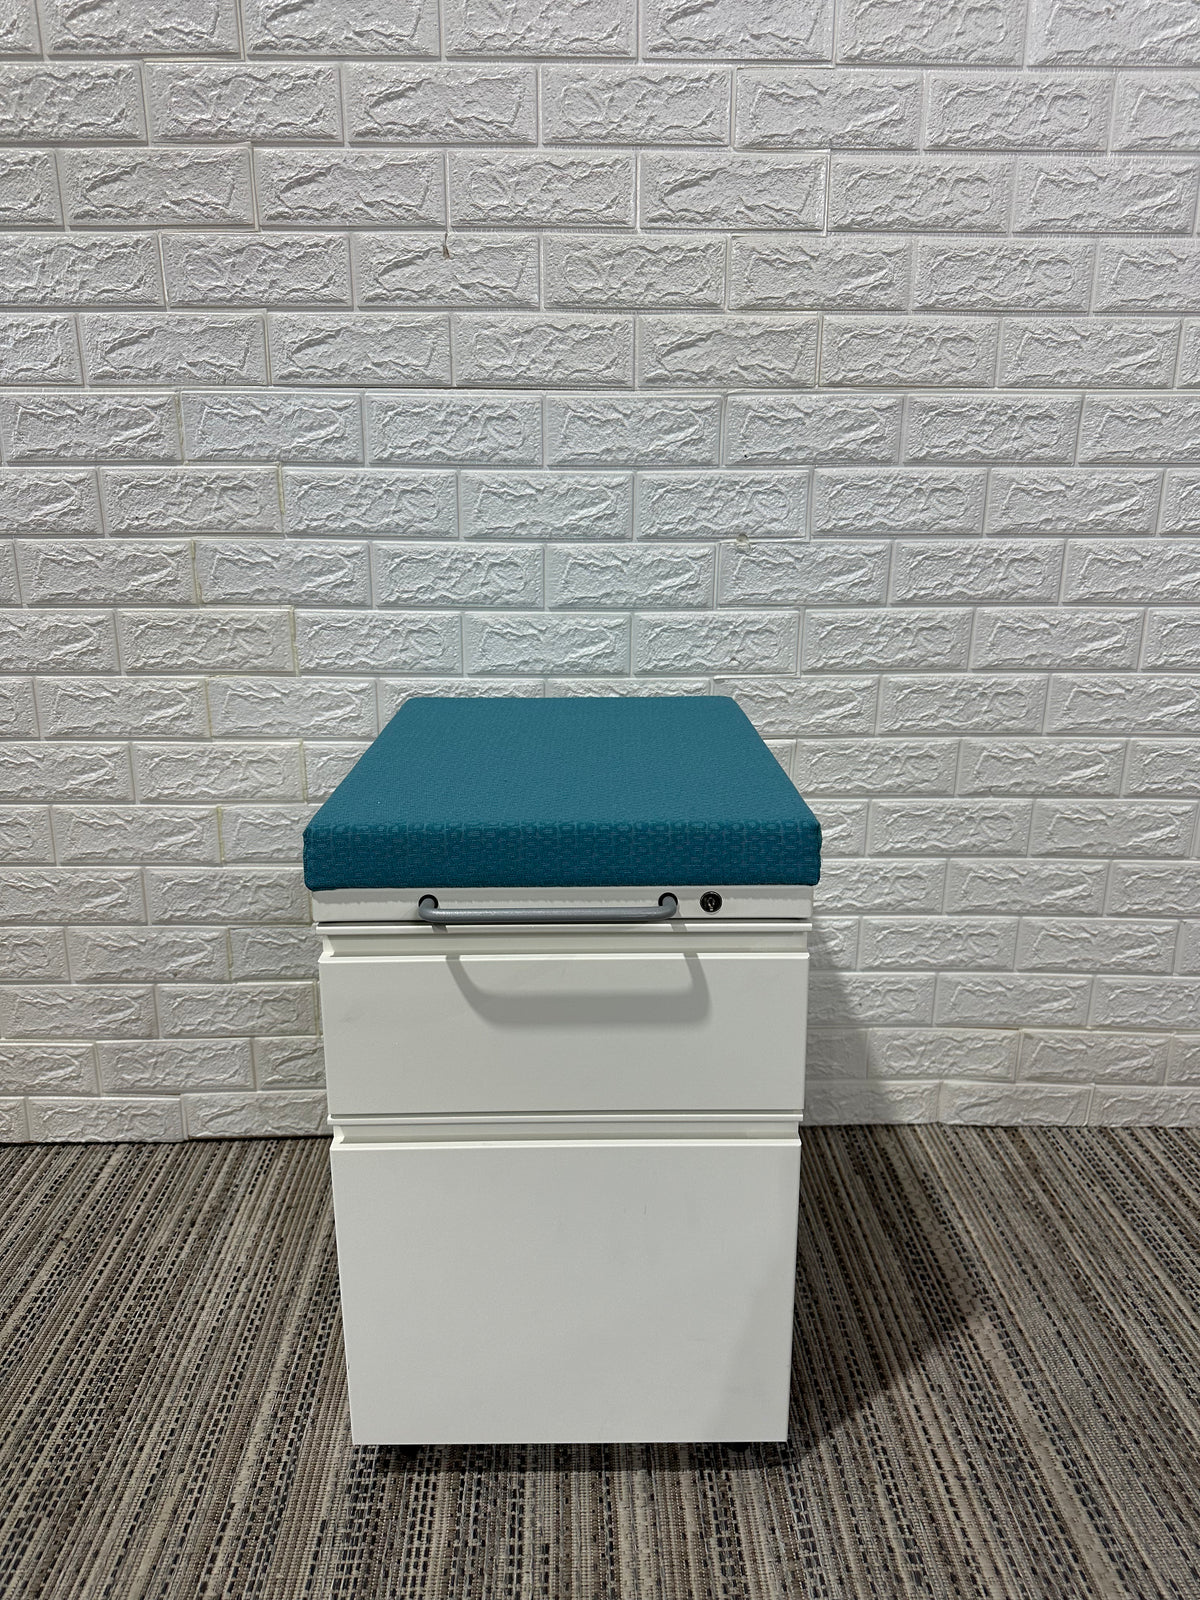 Pre-Owned Blue Pedestals - Duckys Office Furniture